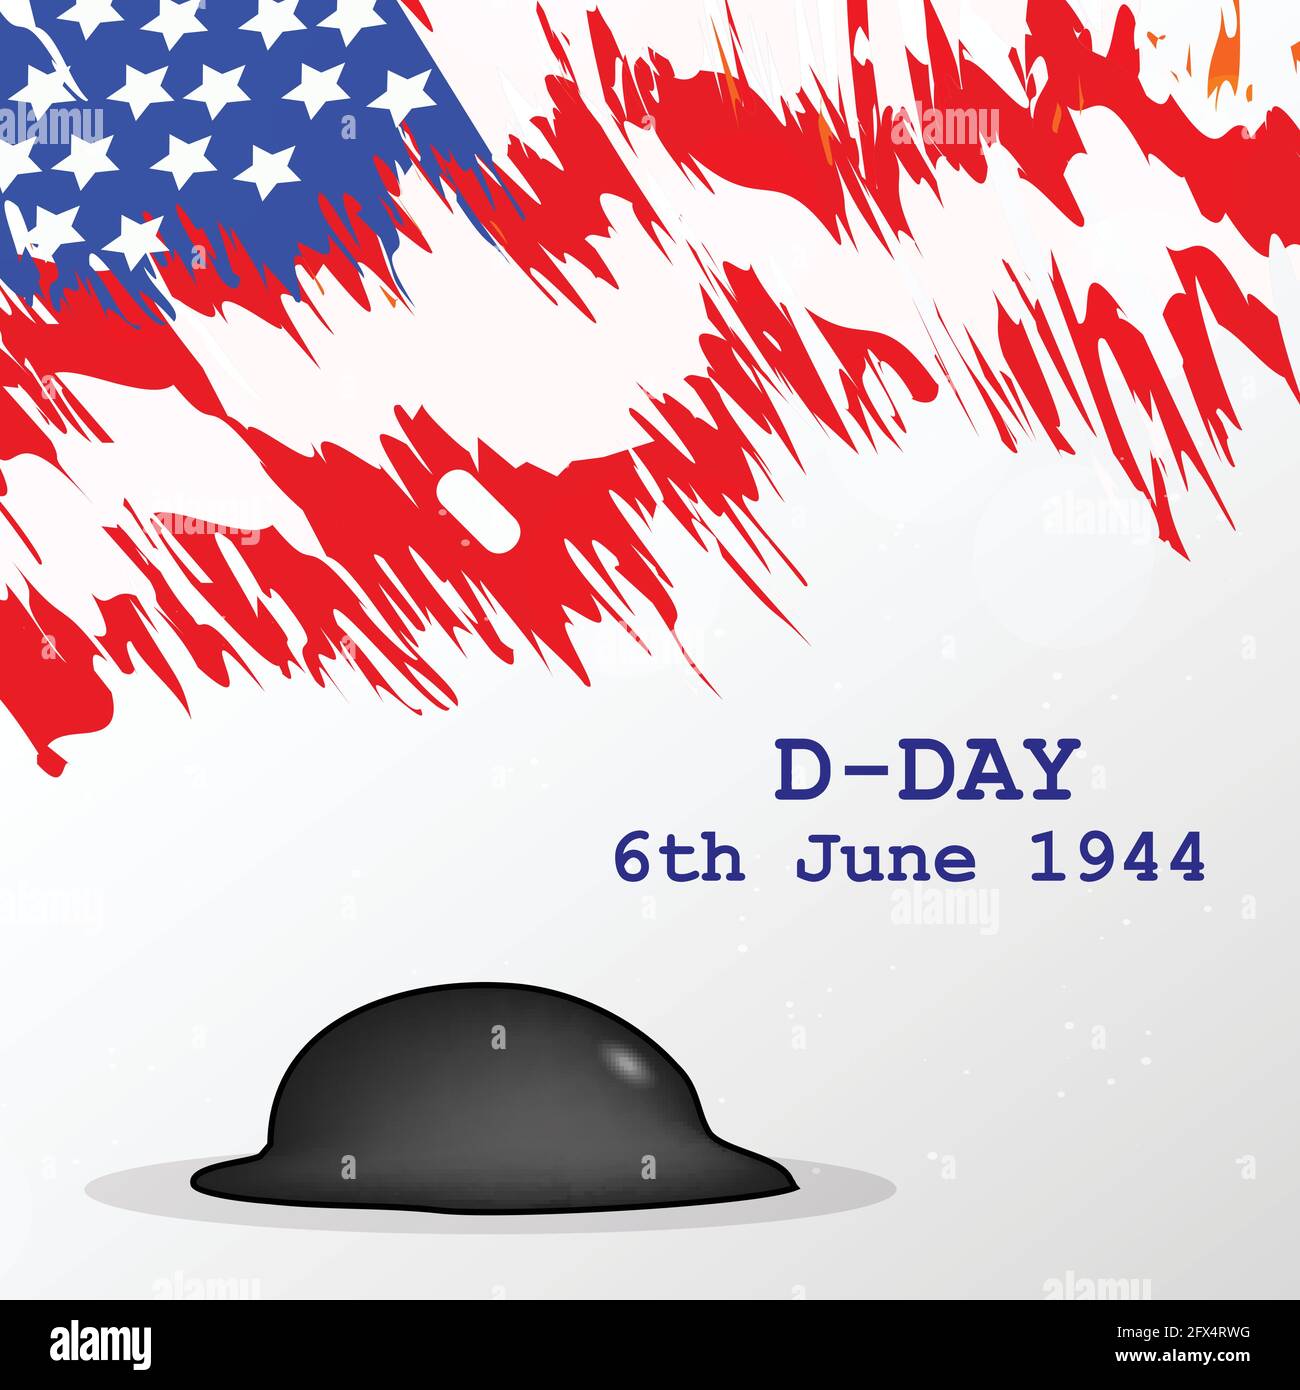 U.S.A D-Day background Stock Vector